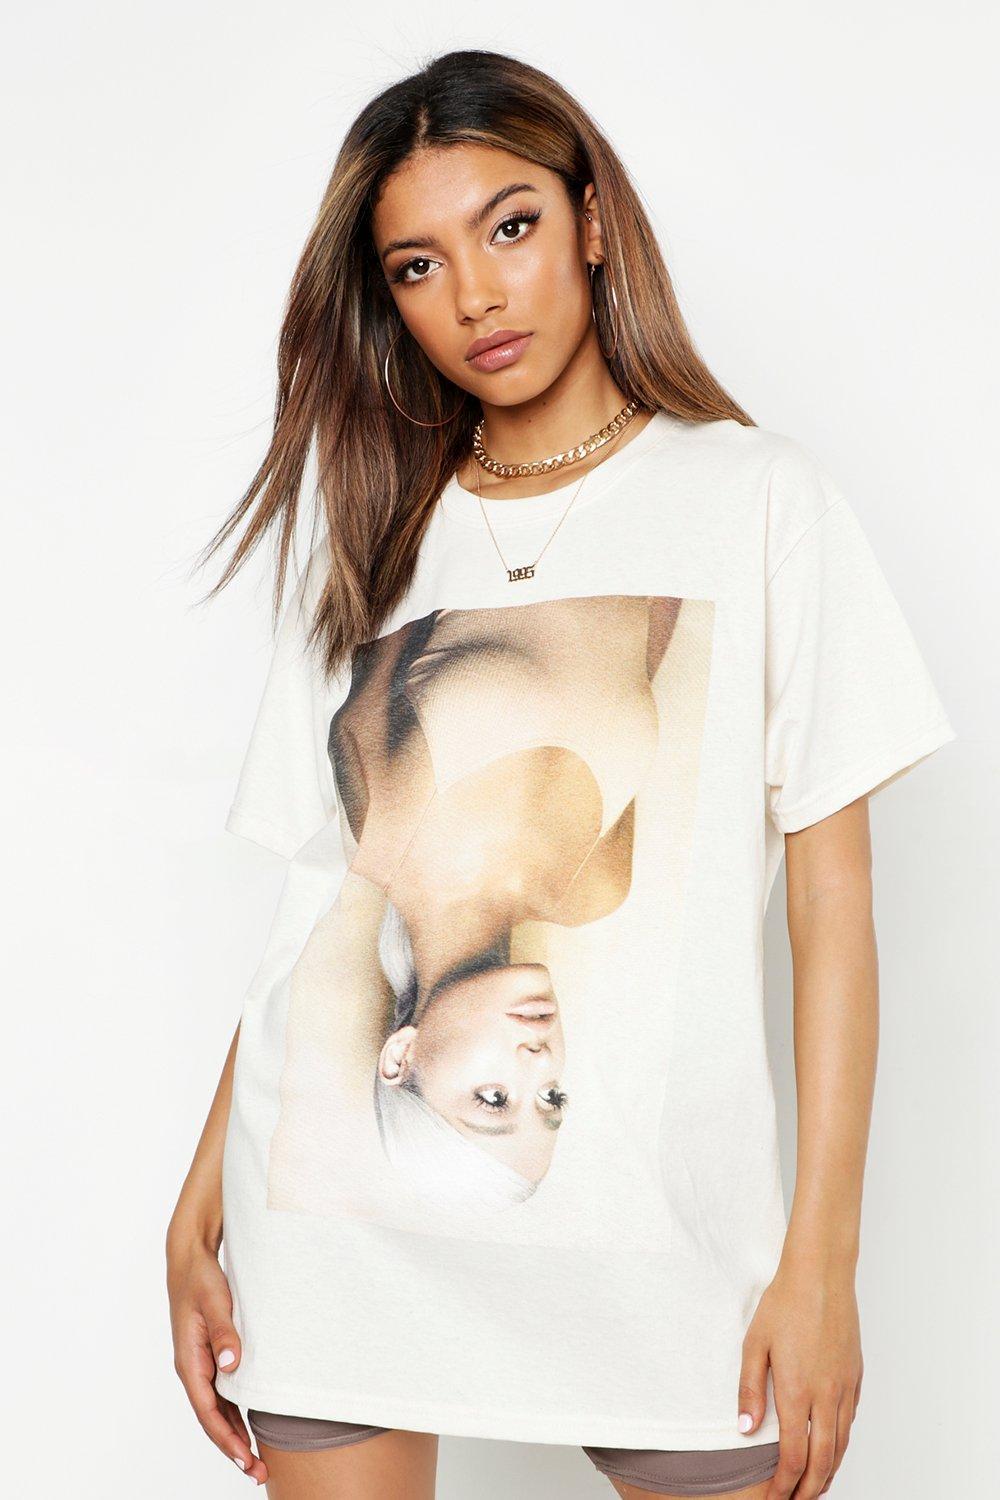 Lyst - Boohoo Ariana Grande Oversized Licenced T-shirt in White